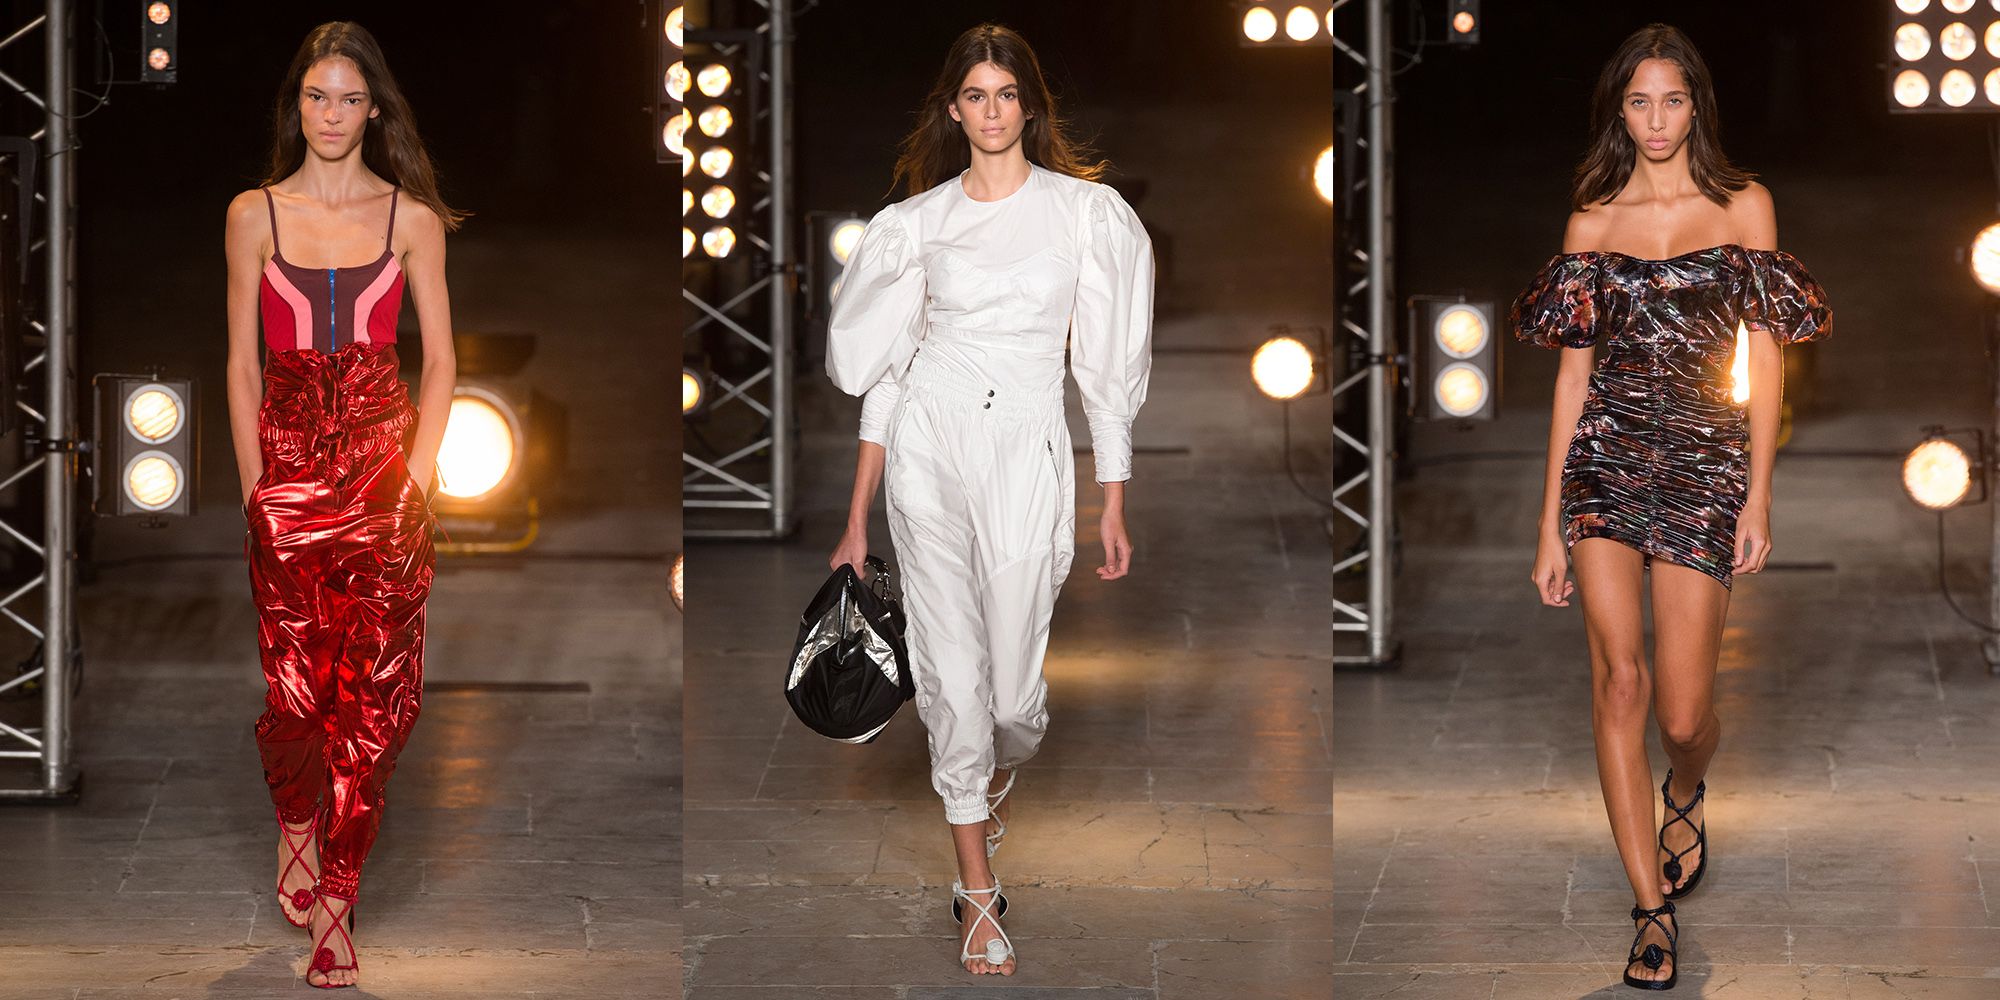 Isabel Marant SS18 Runway Show - Isabel Marant Collection Fashion Spring 2018